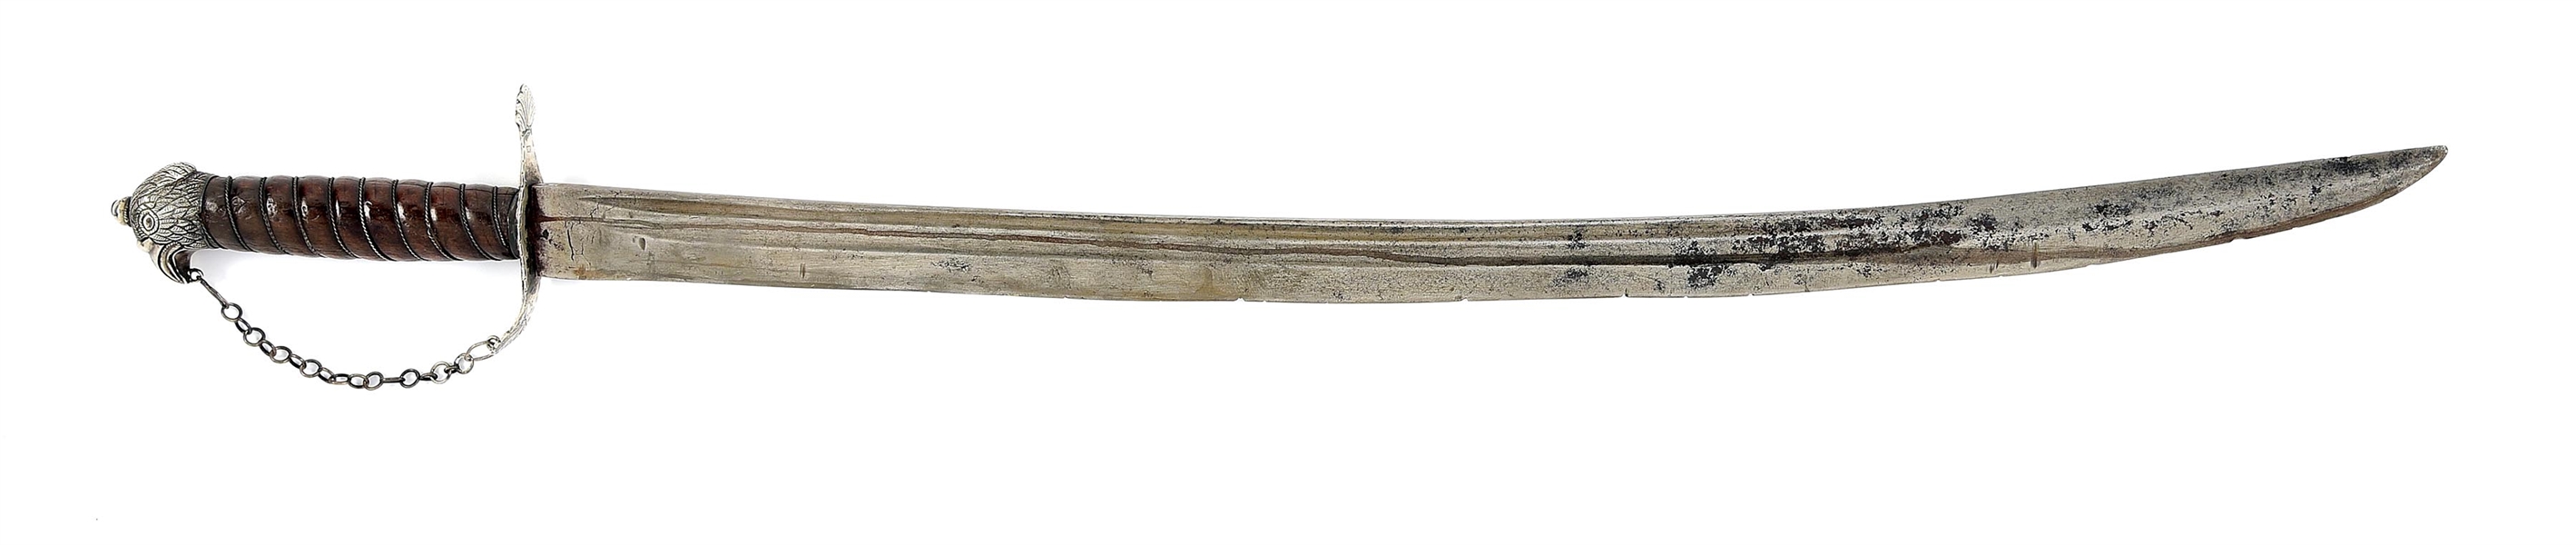 DOCUMENTED ROBERT WEBB HALLMARKED SILVER HILTED SWORD WITH BALTIMORE STYLE EAGLE HEAD POMMEL.